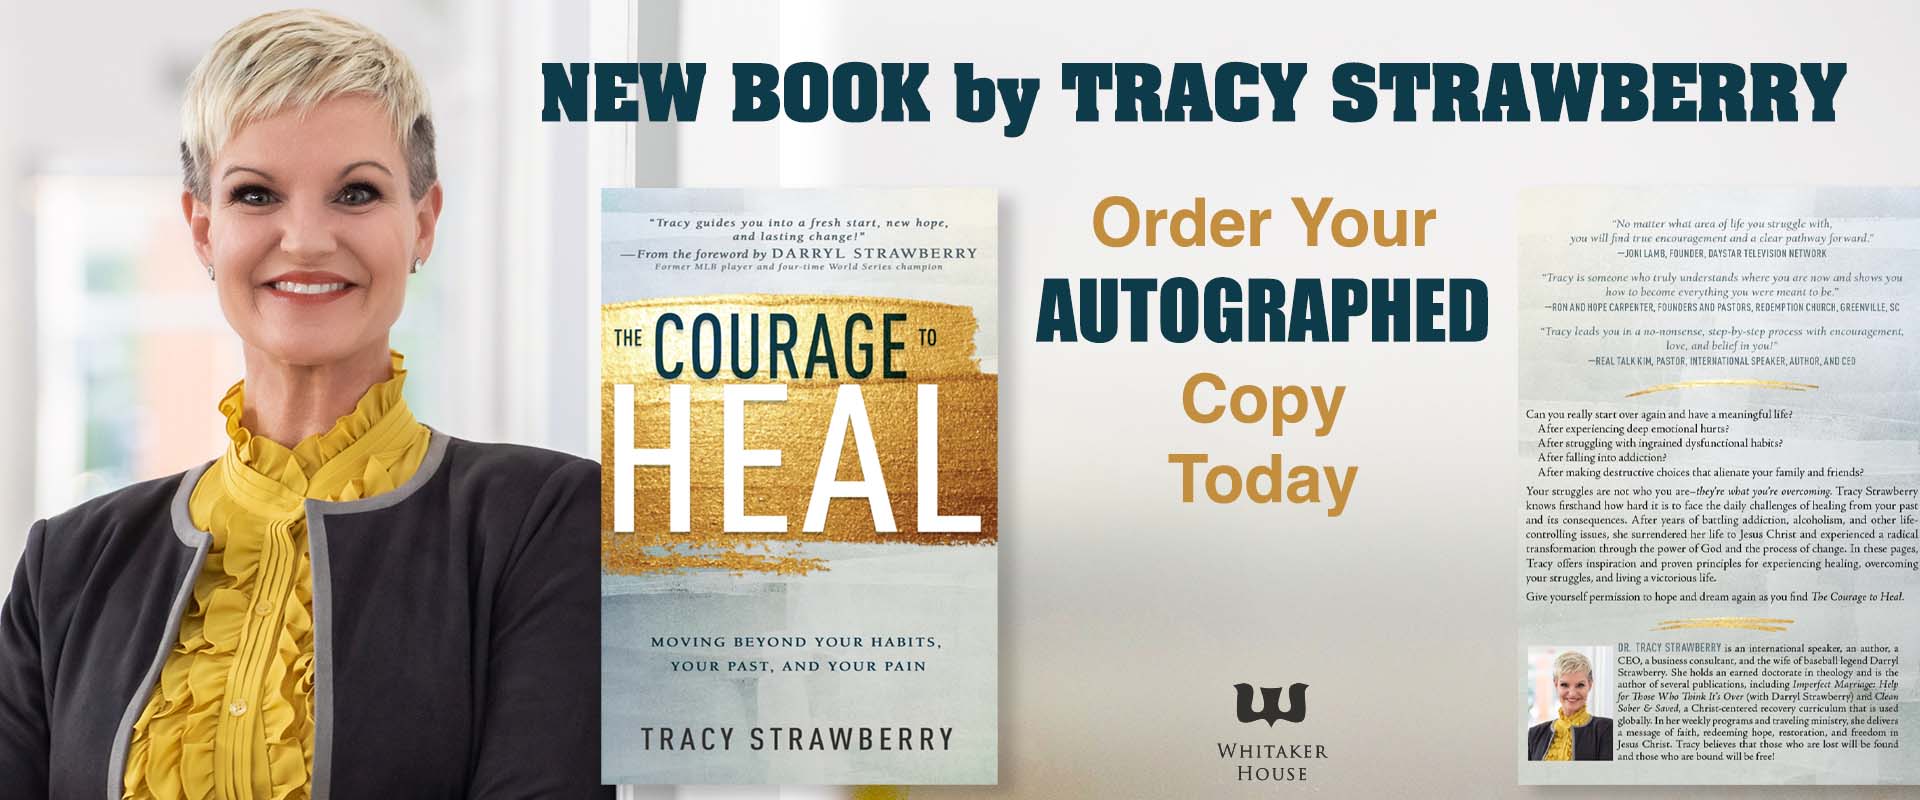 The Courage to heal by Tracy Strawberry